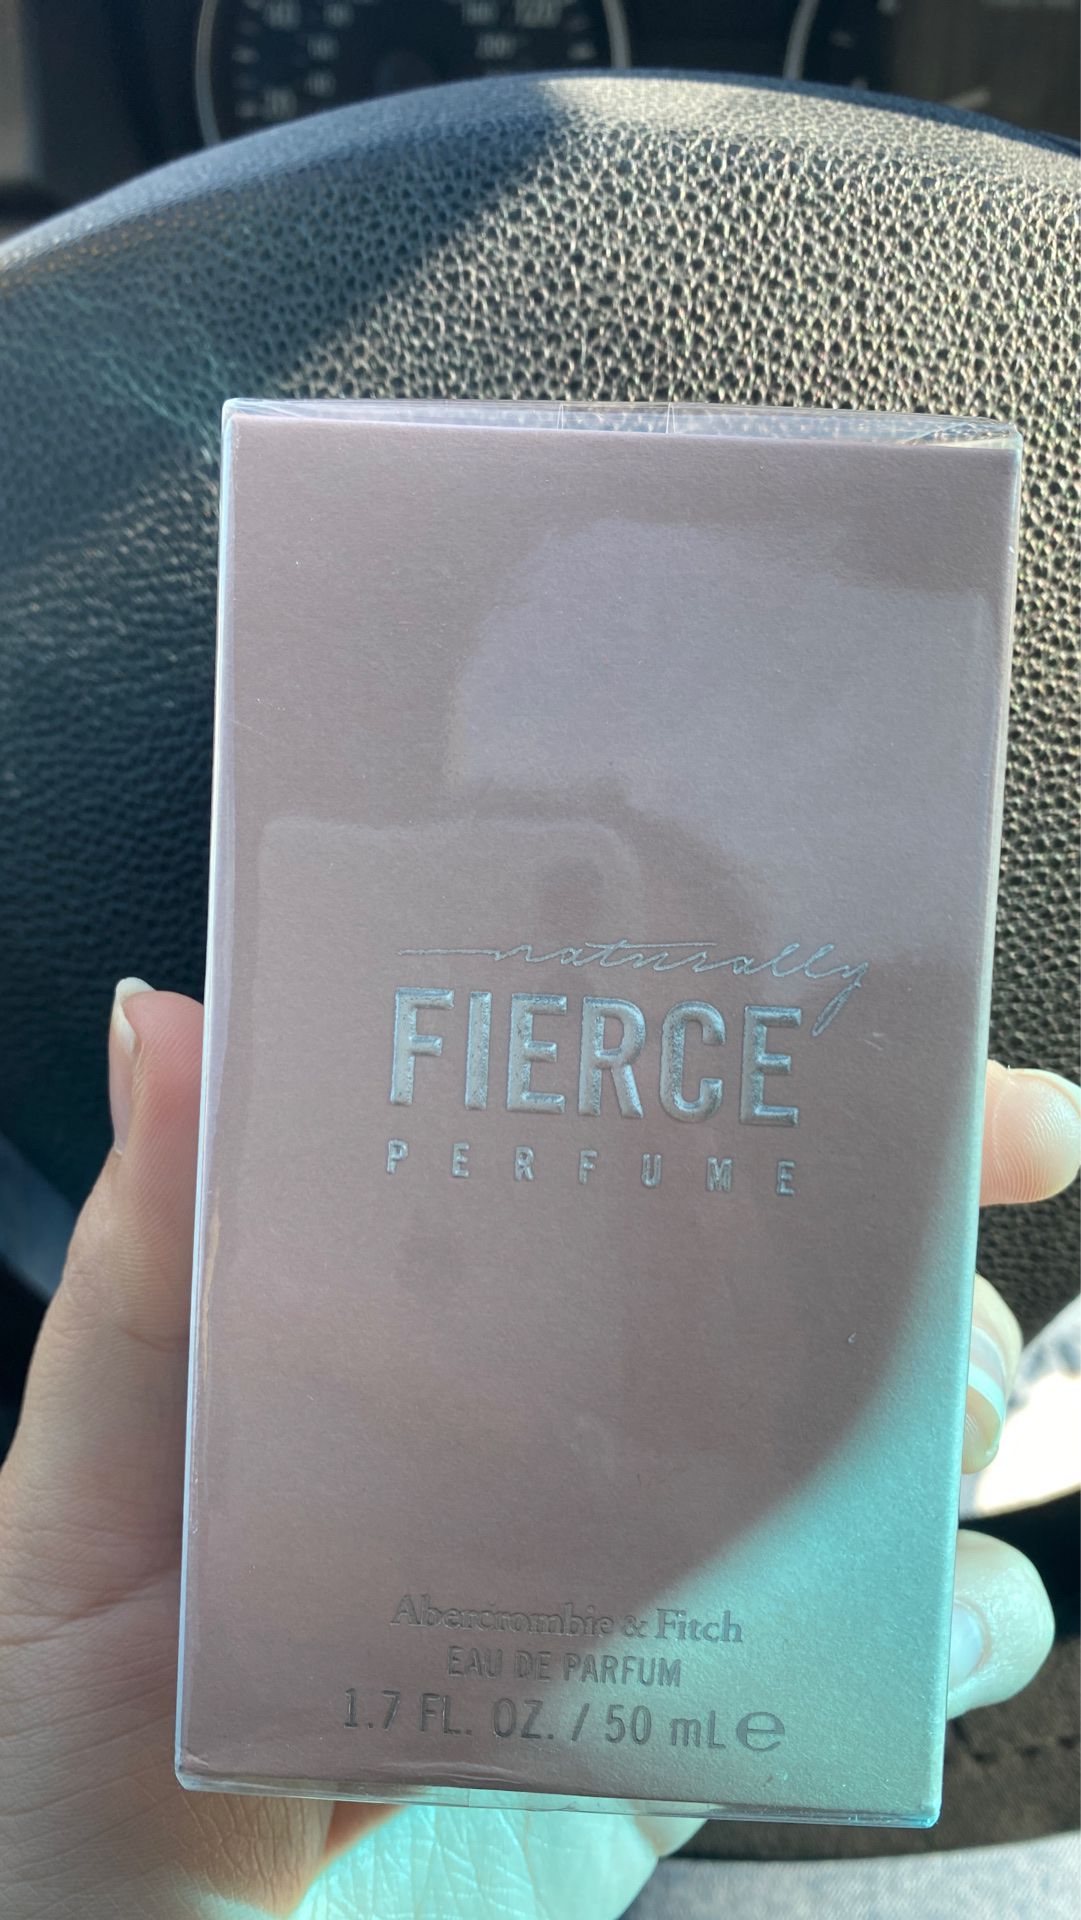 Naturally Fierce Perfume Abercrombie & Fitch